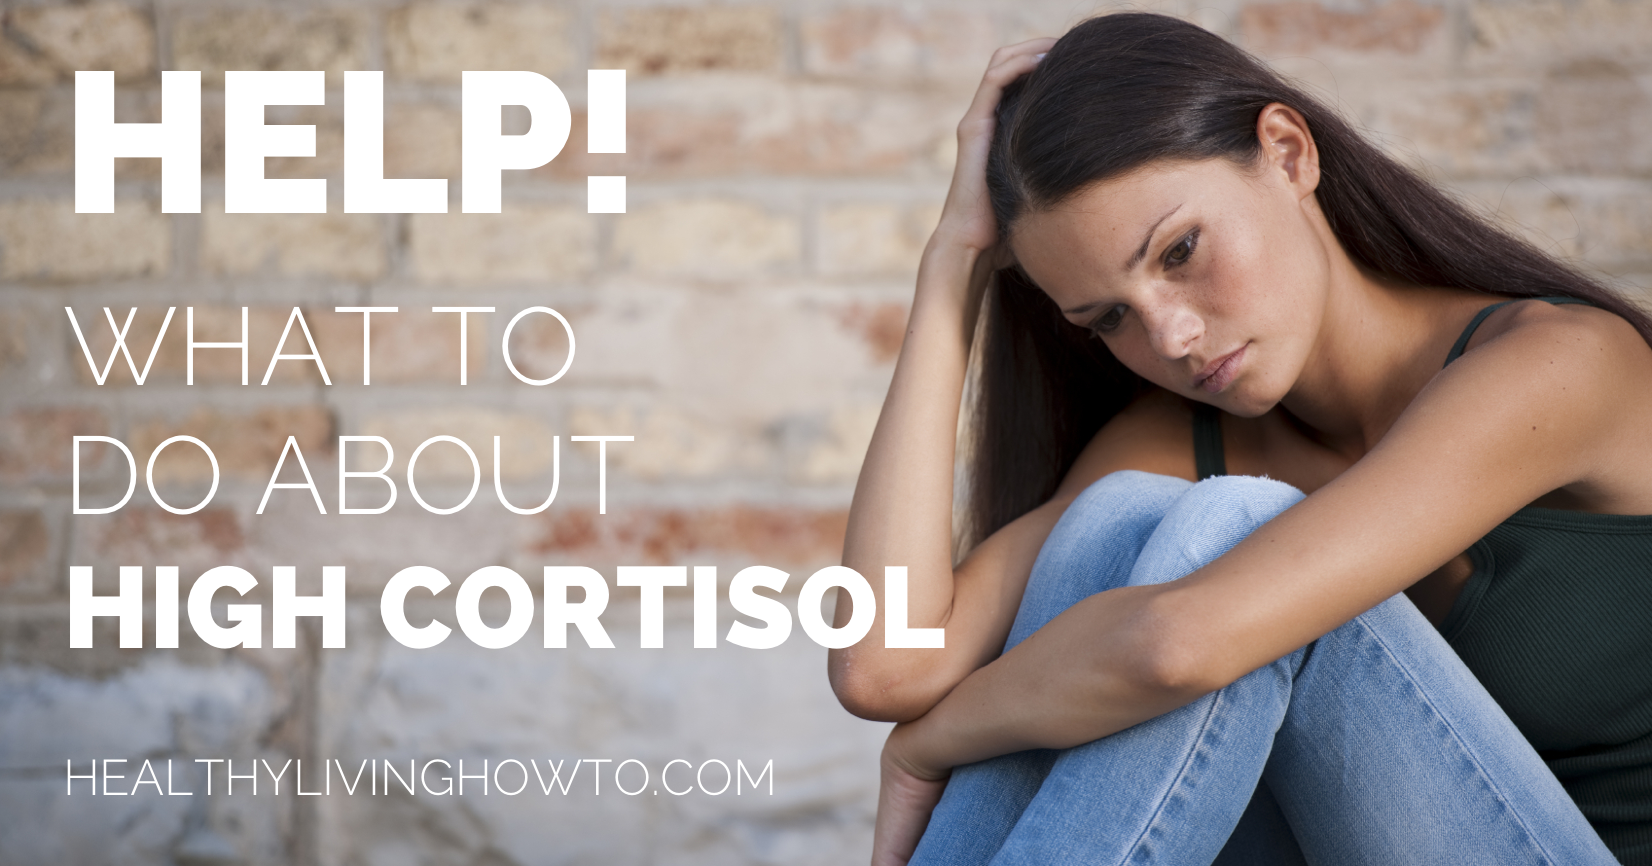 Help! What To Do About High Cortisol